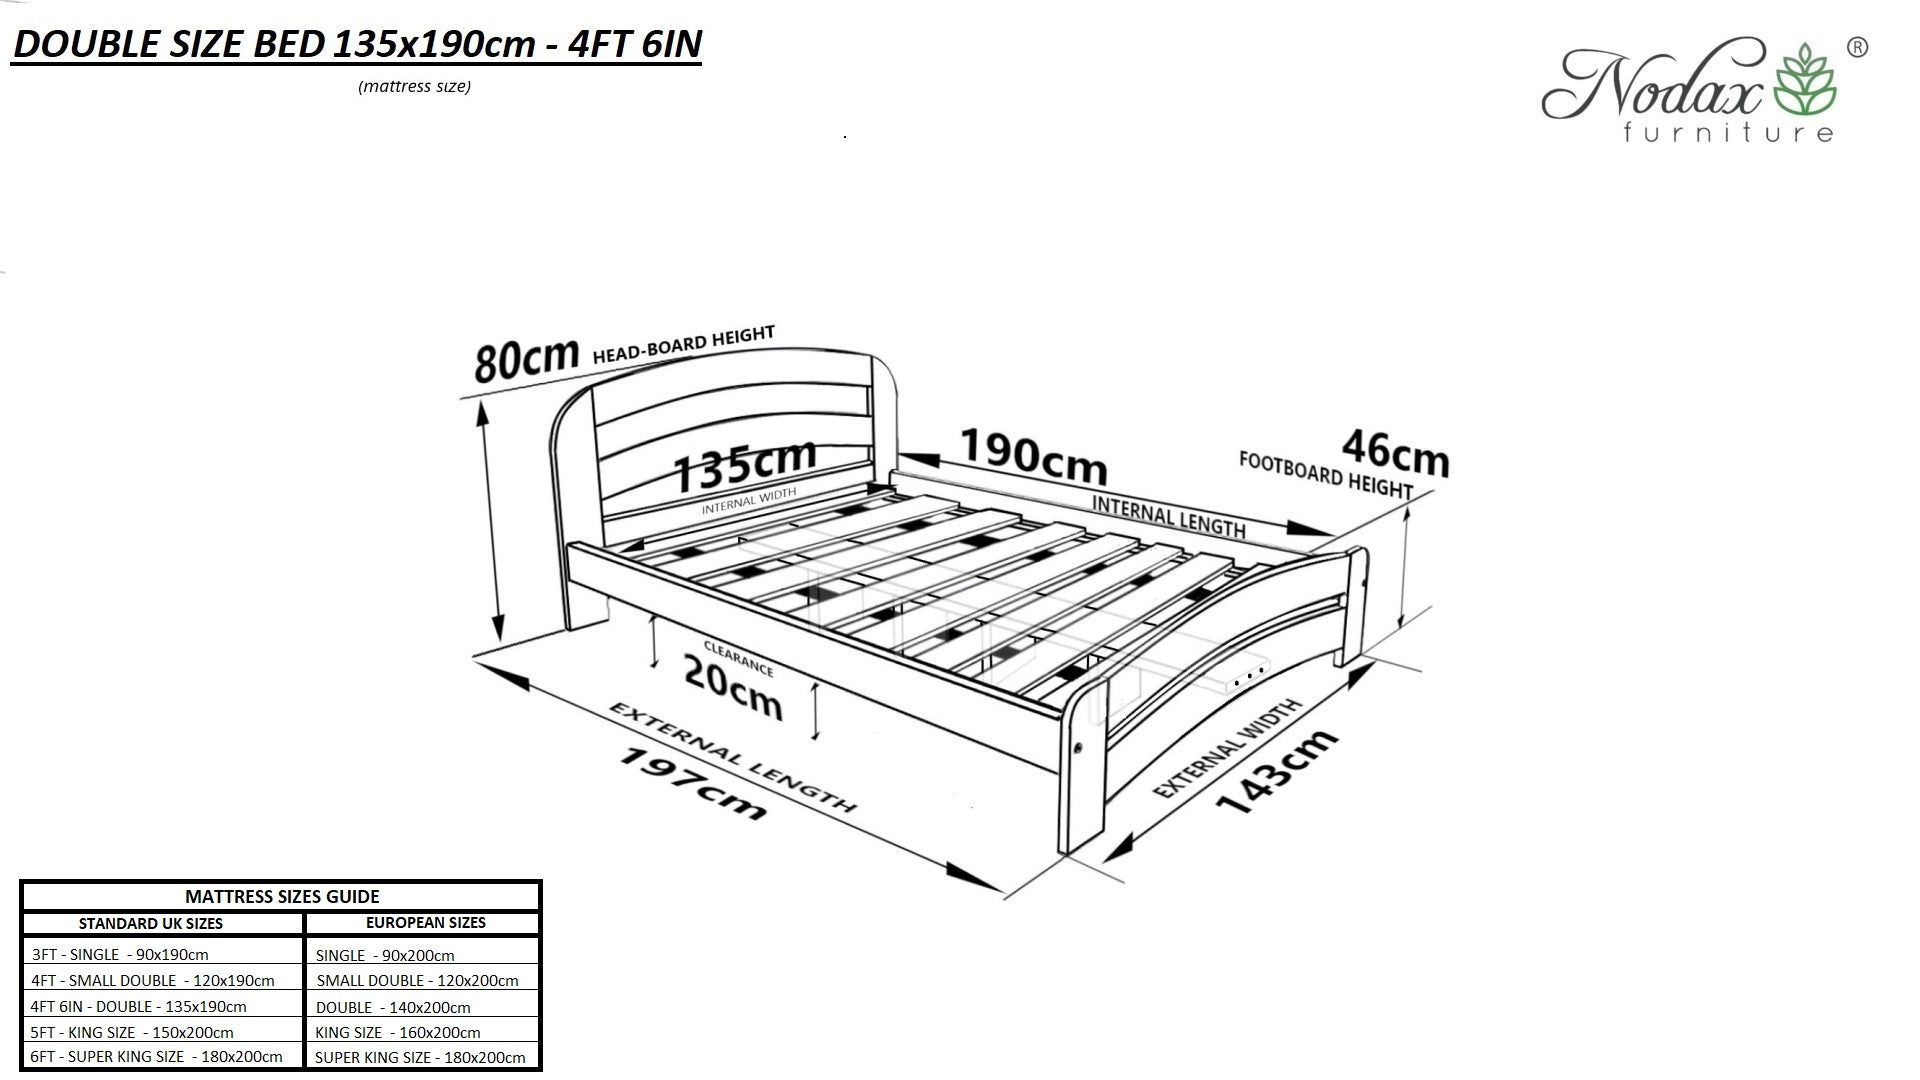 Bed-frame-double-size-4ft6in